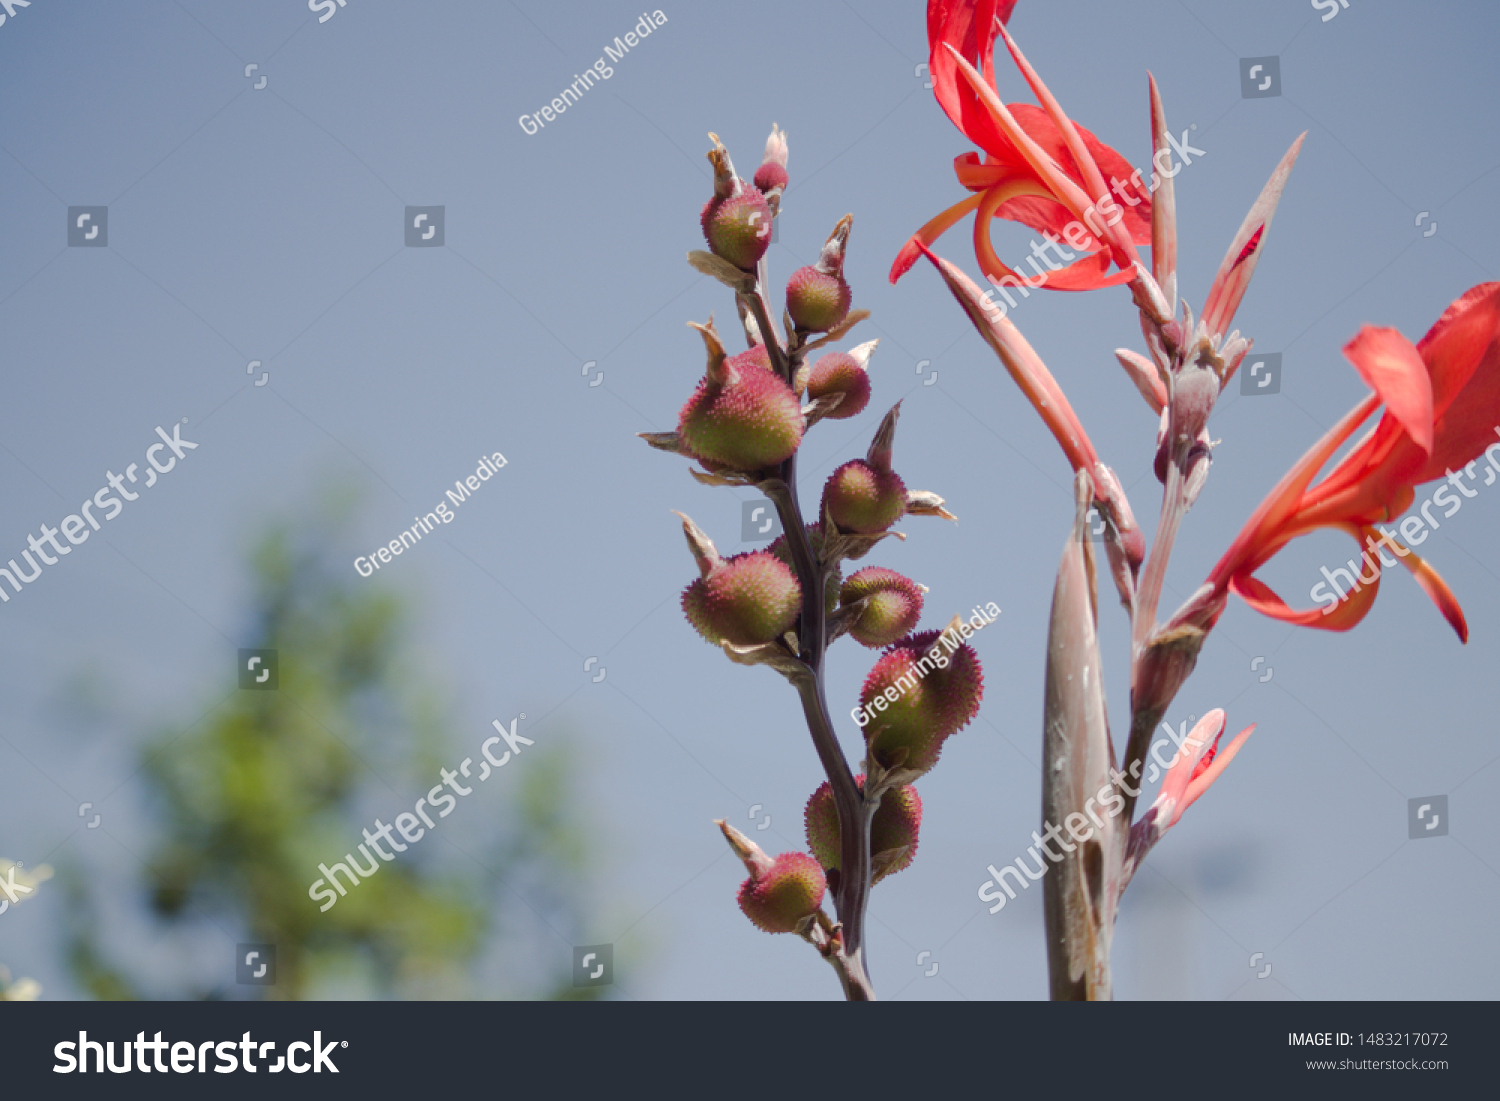 Flower Buds Canna Lilies Stock Photo Edit Now 1483217072